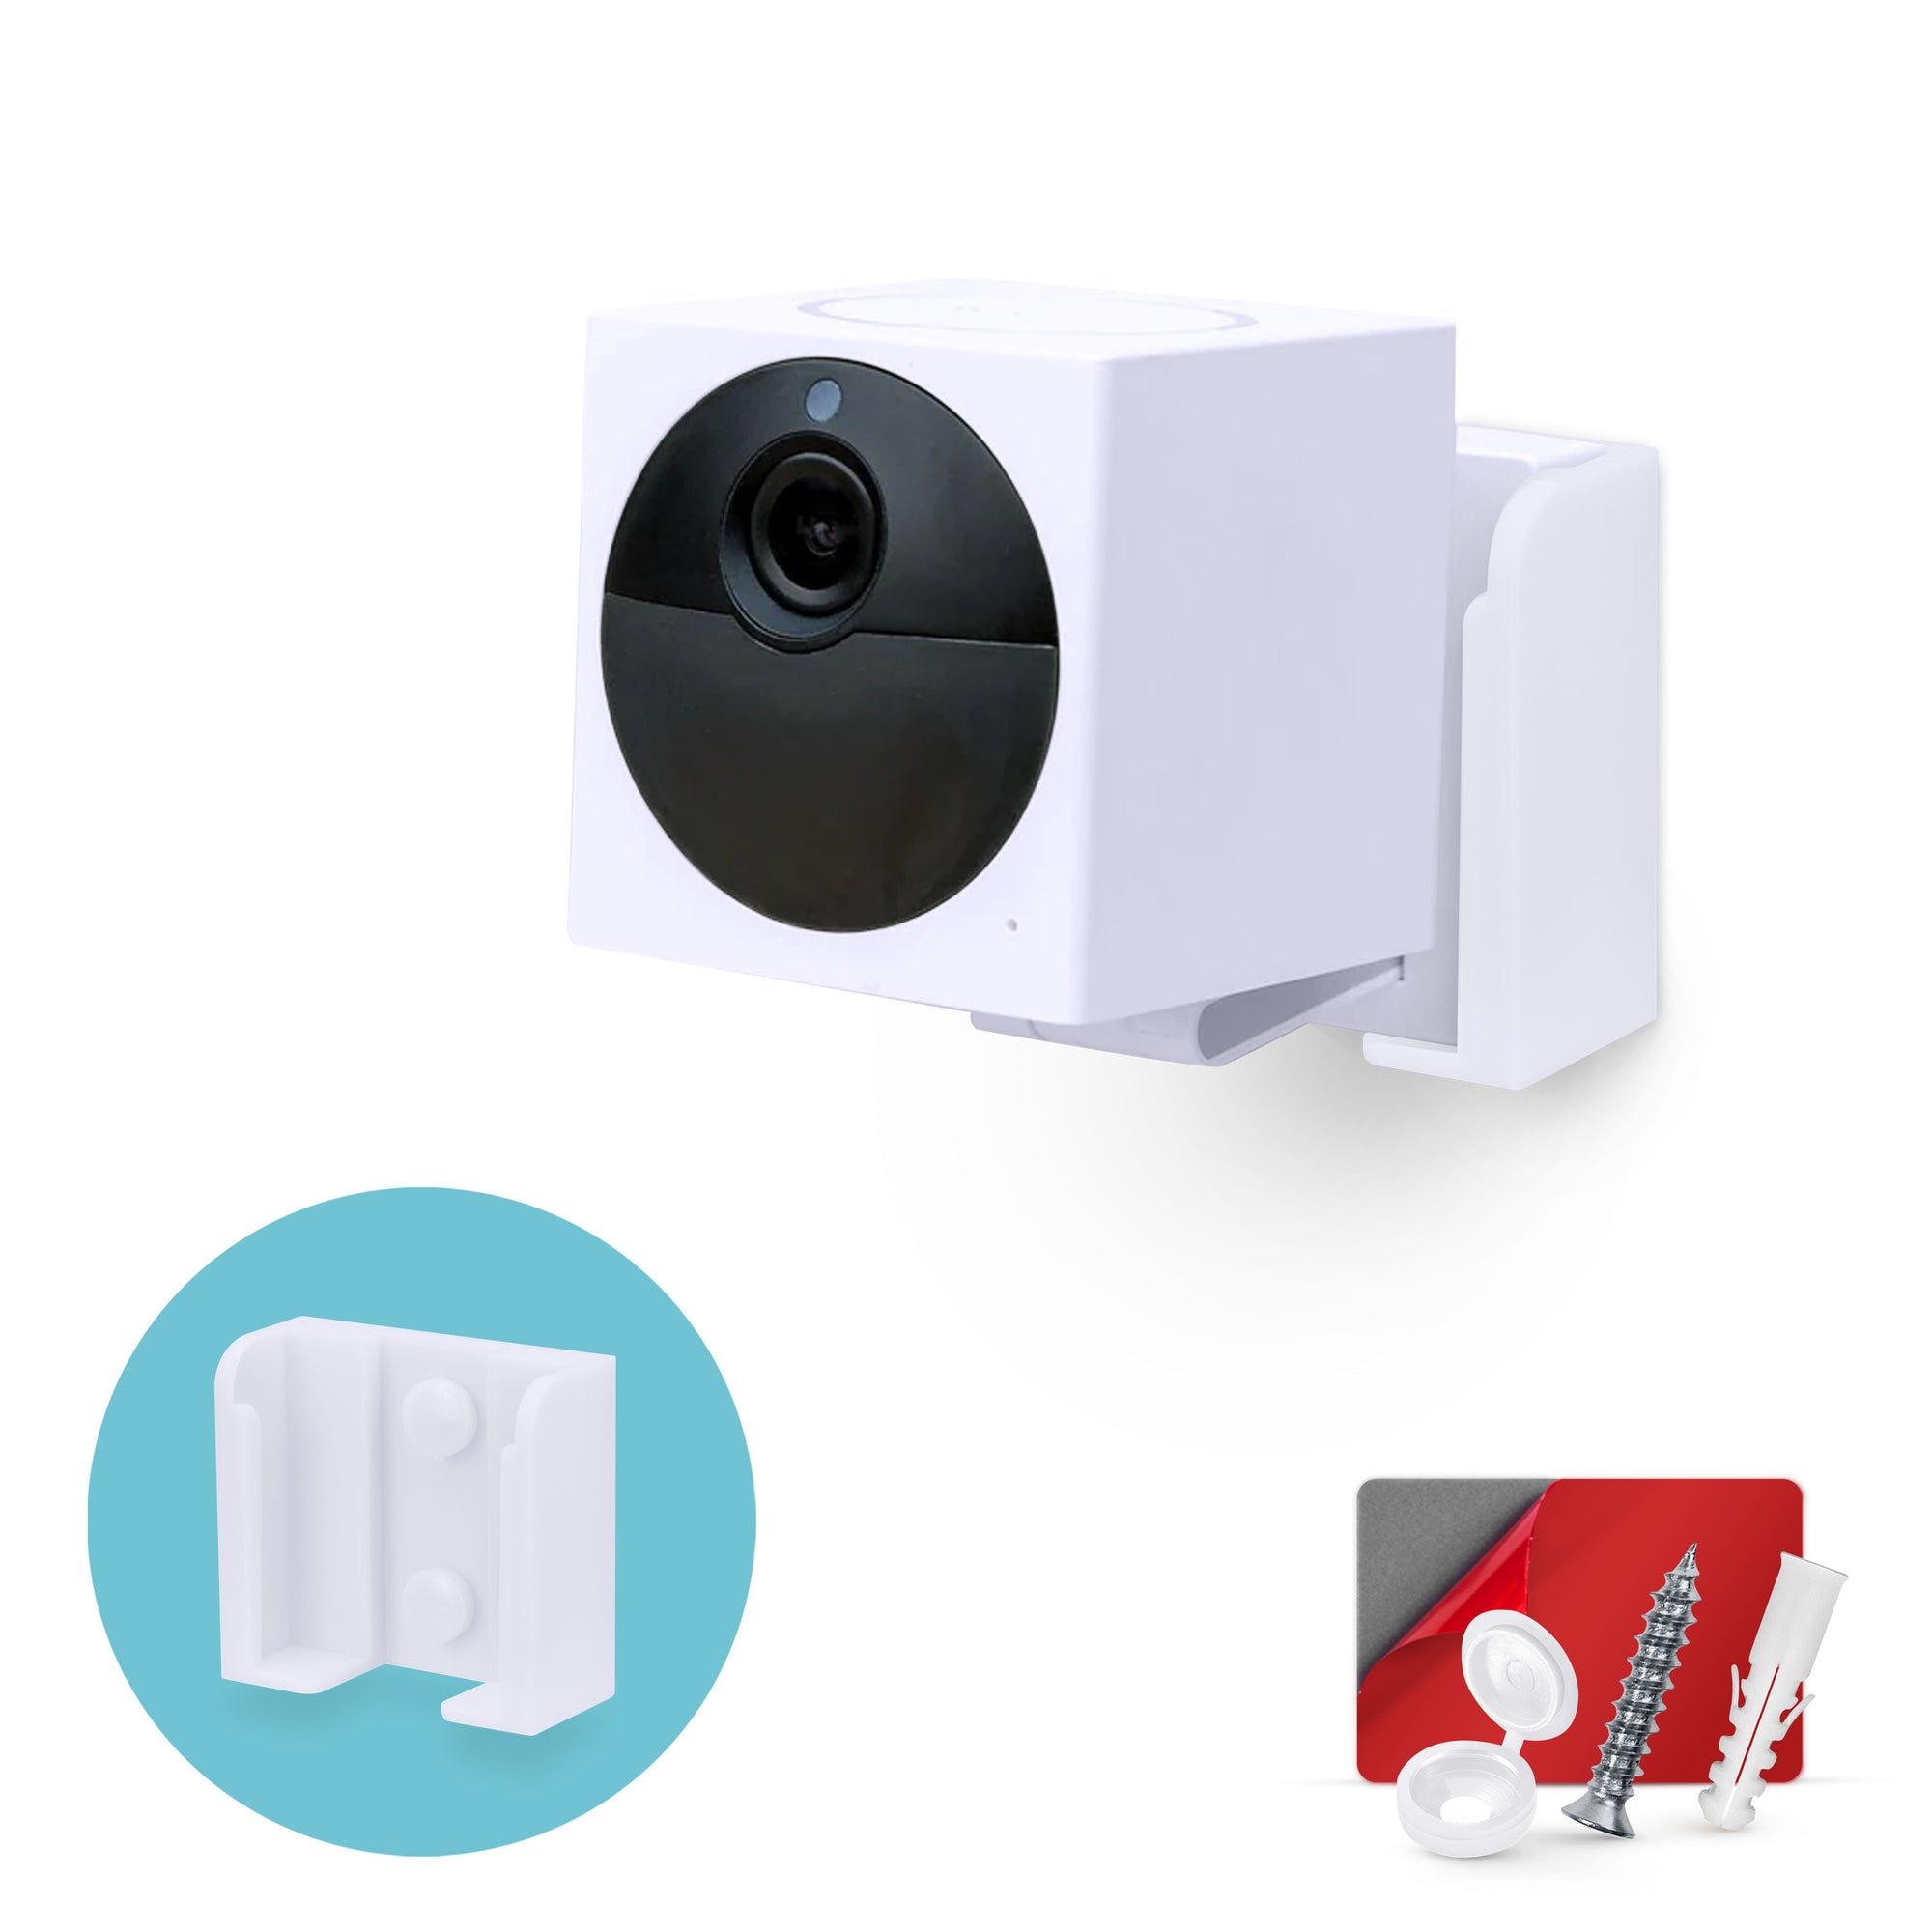 Wall Mount For Wyze Cam Outdoor v2 Security Camera, Easy to Install Holder Bracket, Reduce Blind Spots & Clutter